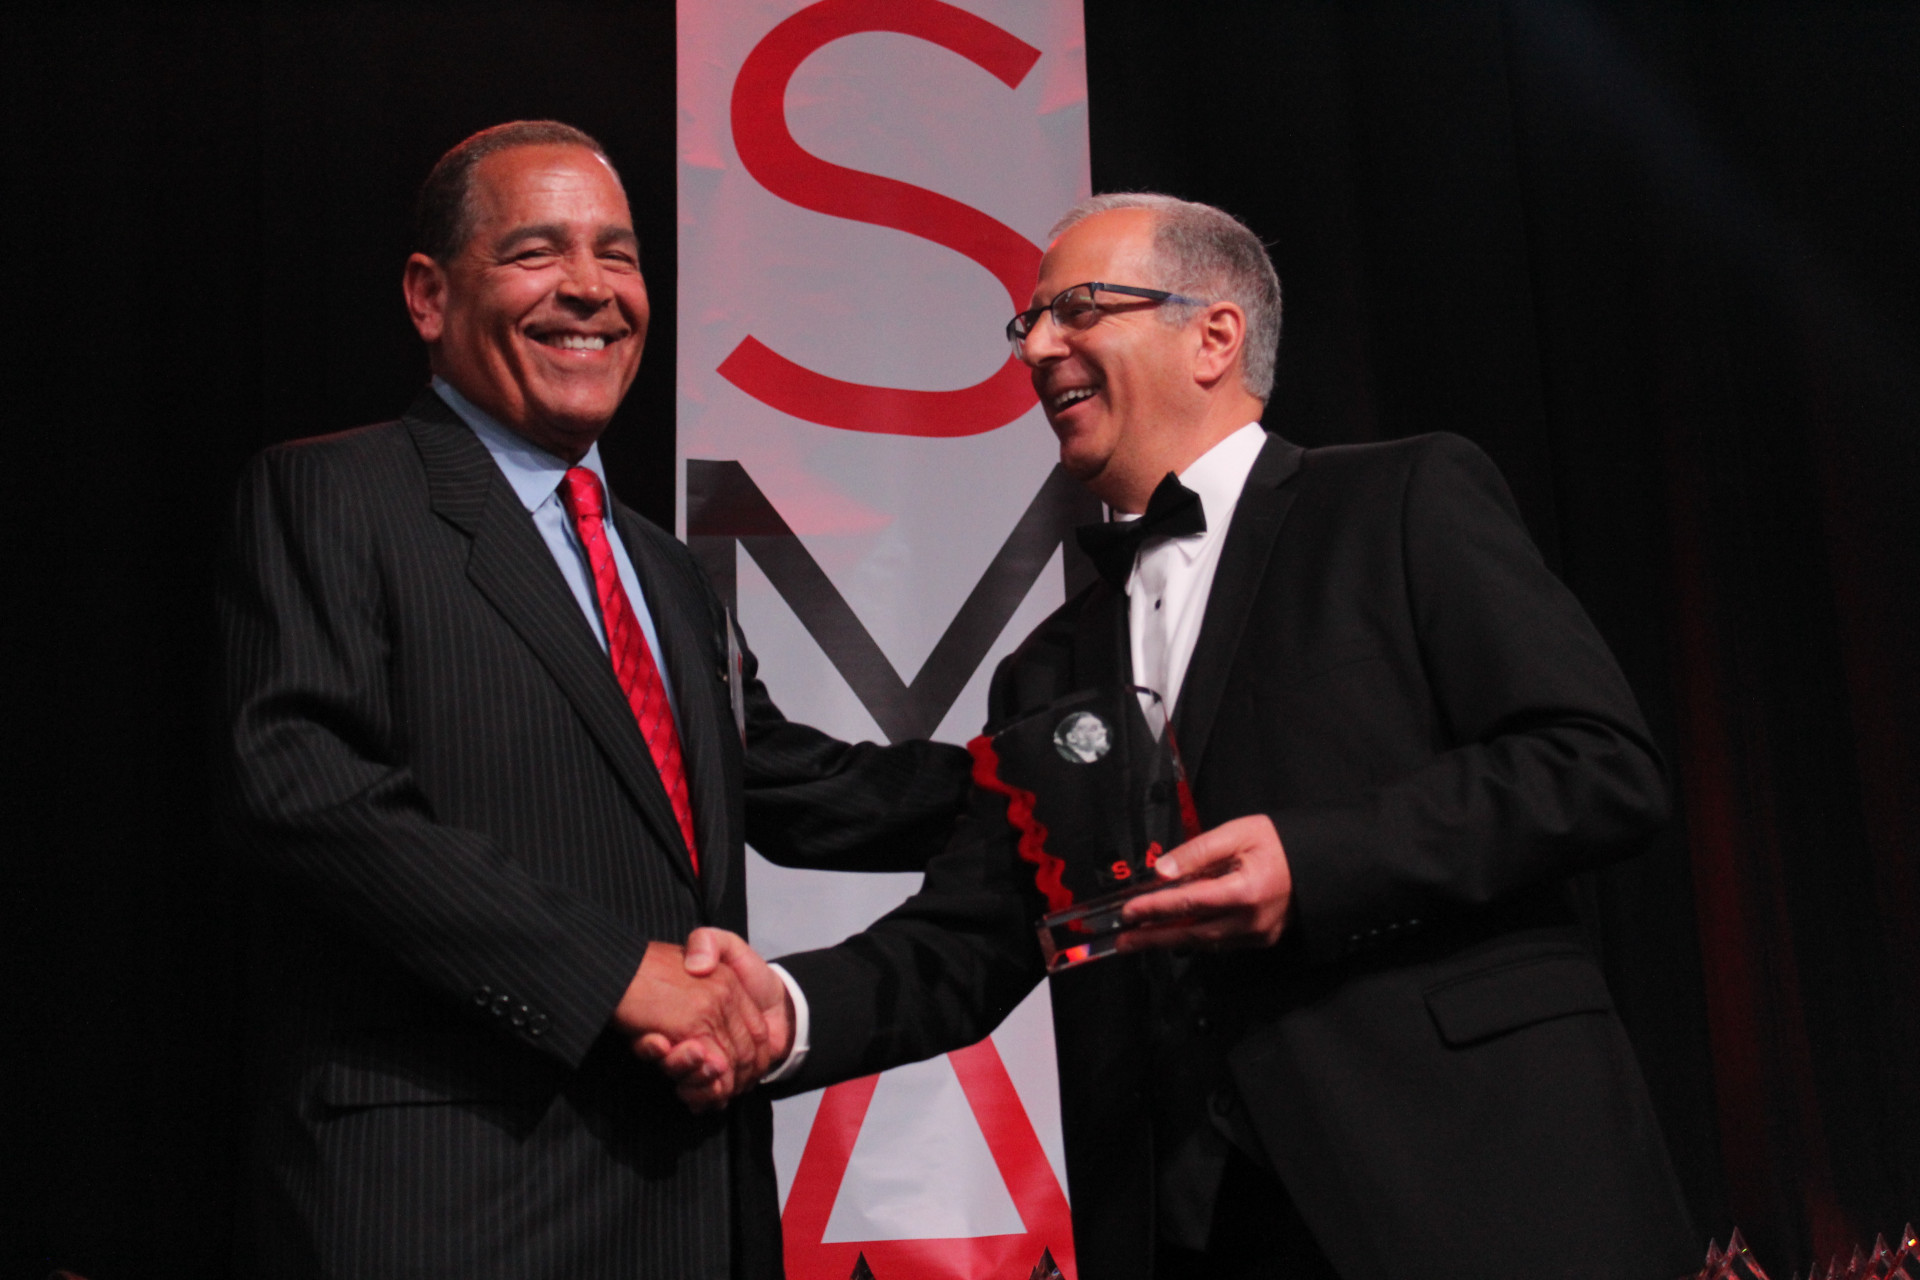 NSMA executive director Dave Goren (right) presents the Big House Gaines College Basketball Coach of the Year Award to Kelvin Sampson of the University of Houston (Daniel Coston Photo)